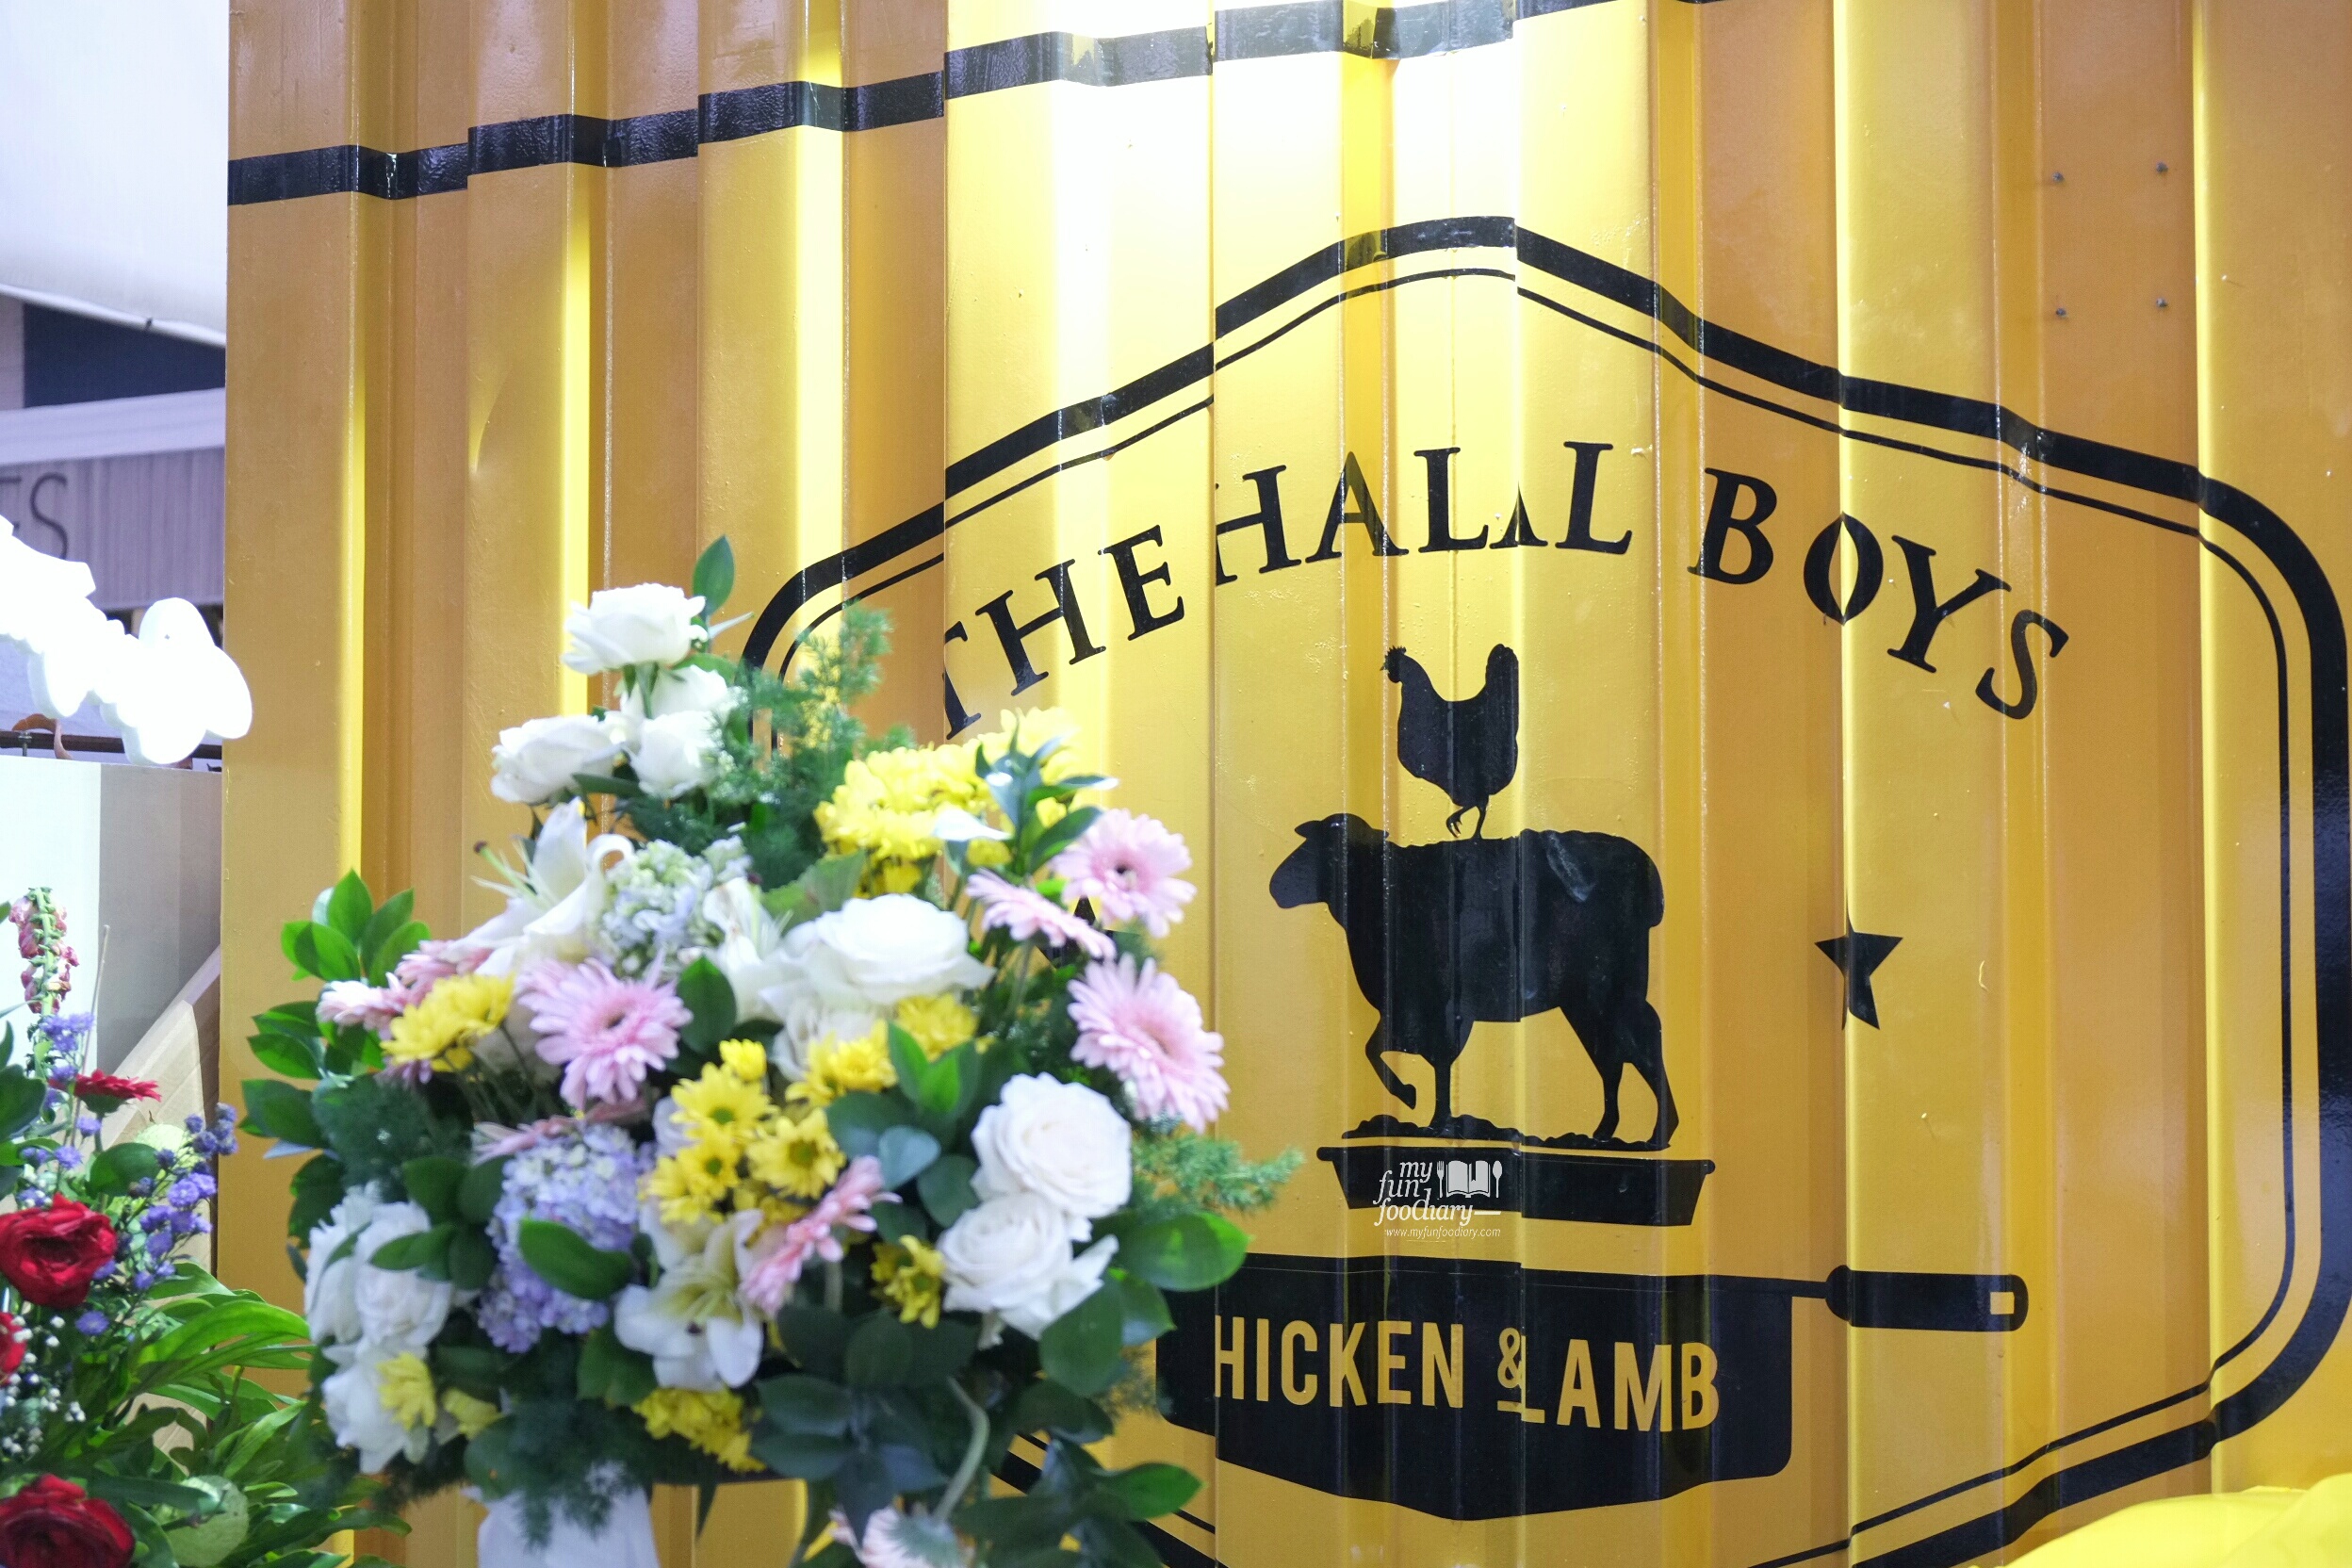 Decor Foodtruck at The Halal Boys by Myfunfoodiary